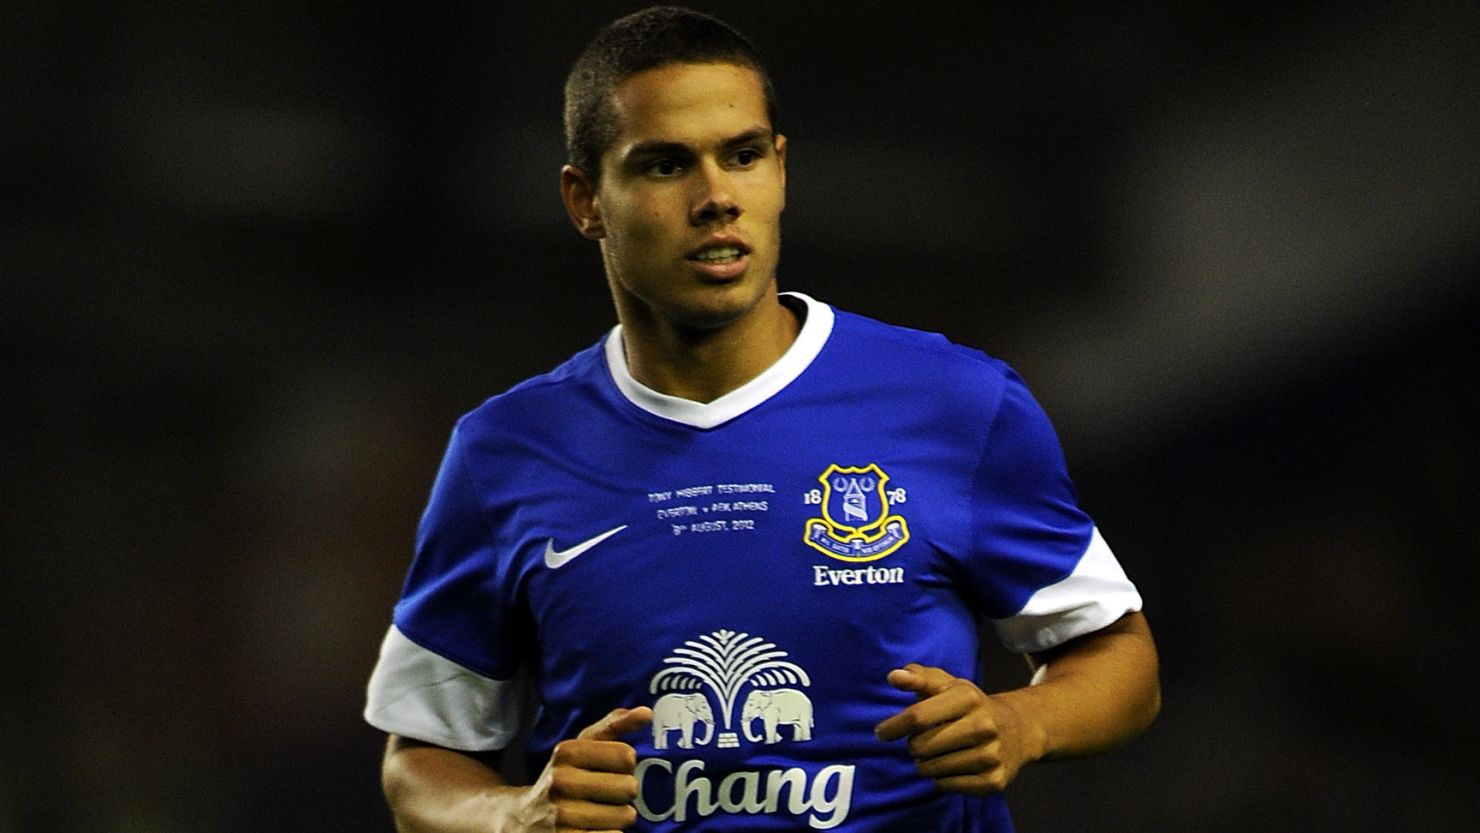 Jack Rodwell made his Everton debut in 2007 and has played twice for England.